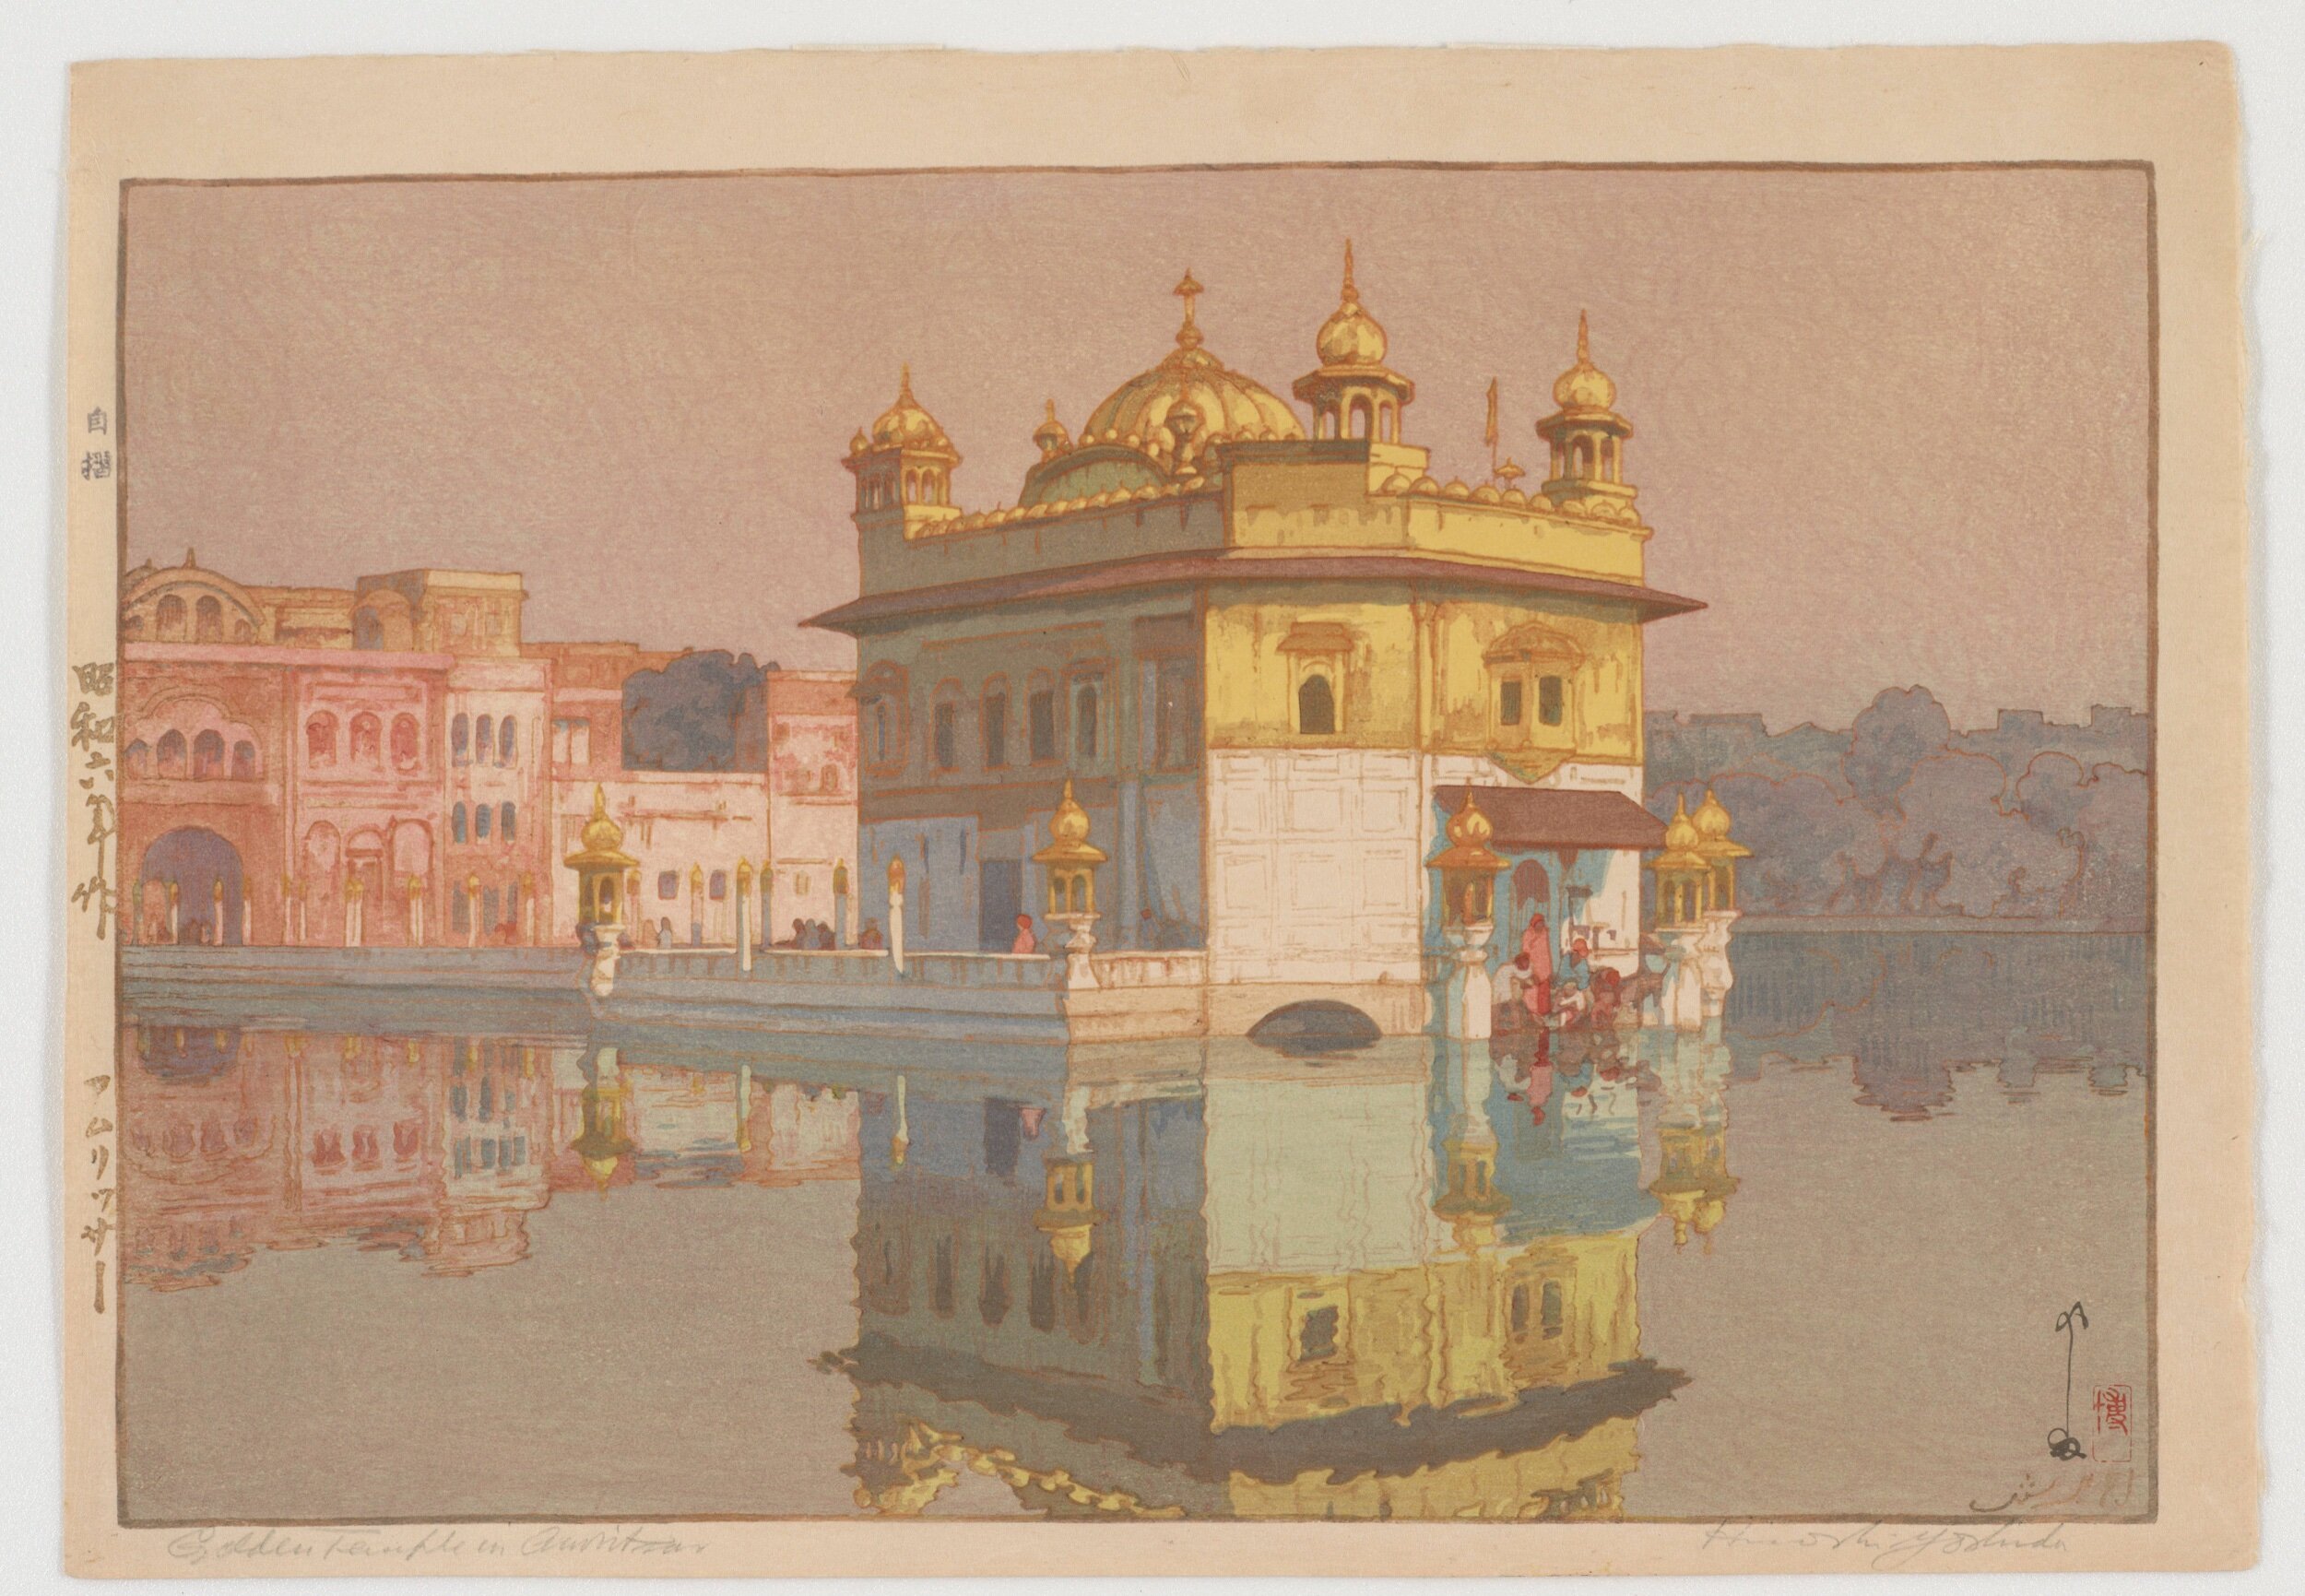 Golden Temple in Amritsar,&nbsp;from the series India and Southeast Asia.&nbsp;Yoshida Hiroshi, 1931.